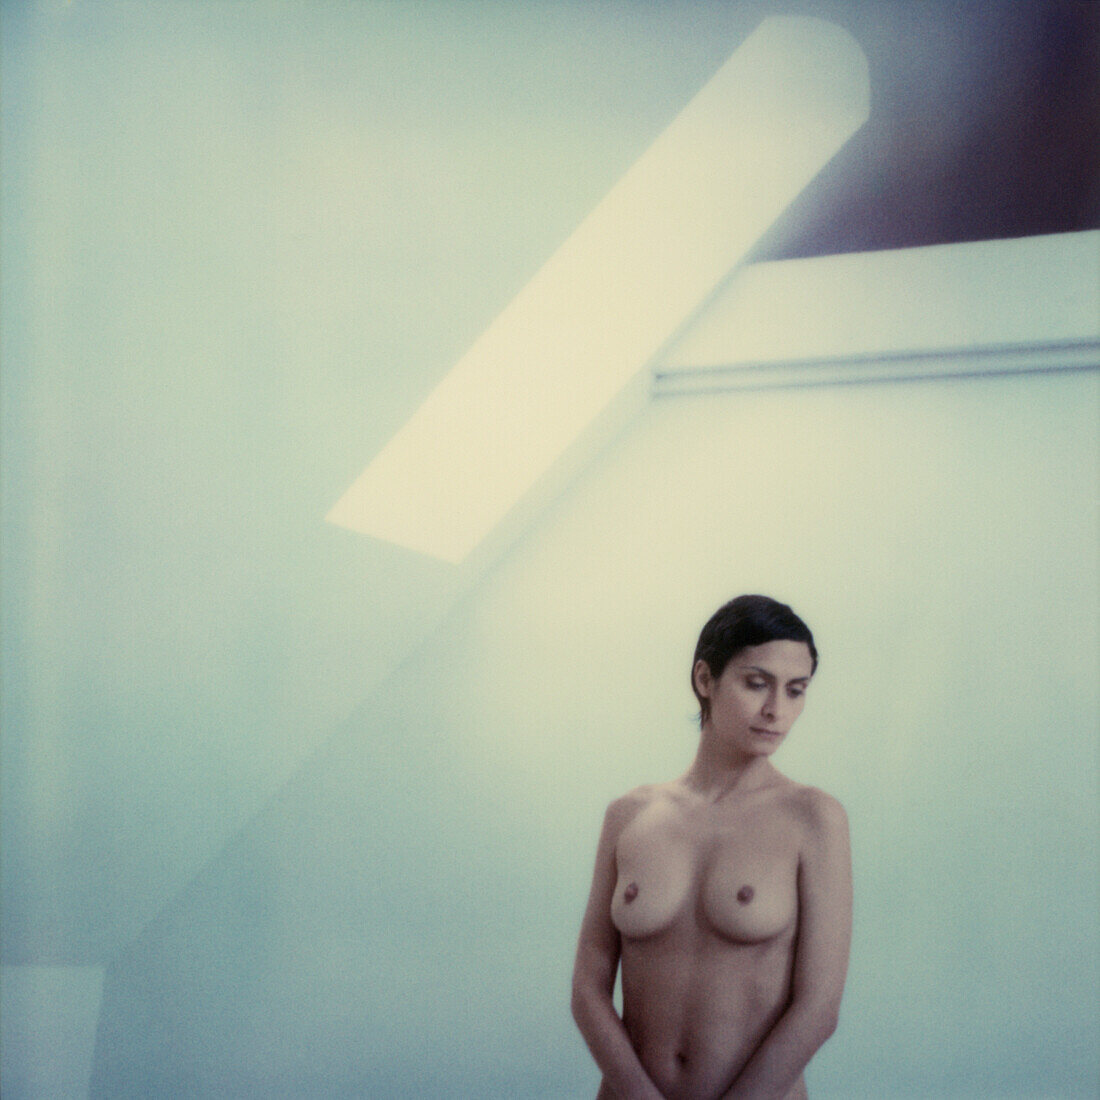 Topless woman in interior